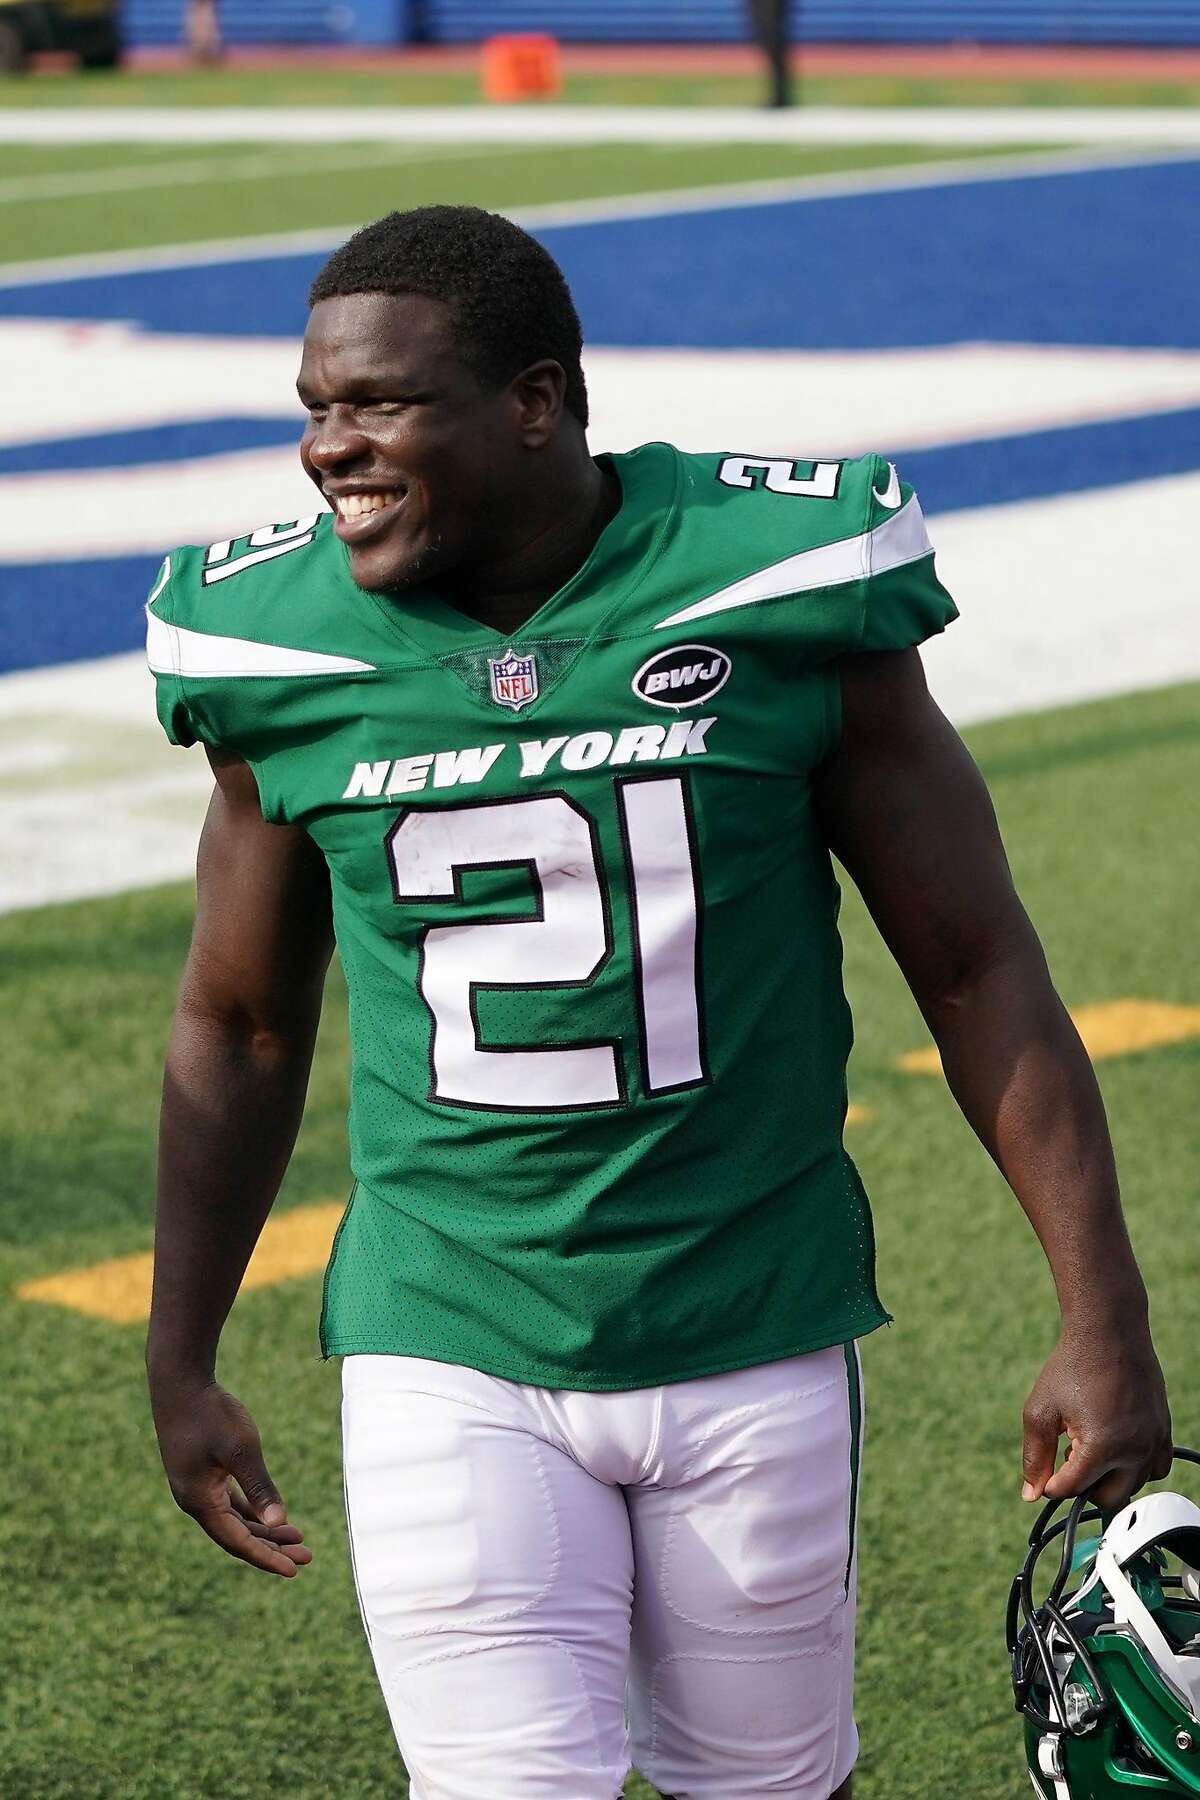 ORCHARD PARK, NEW YORK - SEPTEMBER 13: Frank Gore #21 of the New York Jets leaves the field following a game against the Buffalo Bills at Bills Stadium on September 13, 2020 in Orchard Park, New York. (Photo by Stacy Revere/Getty Images)